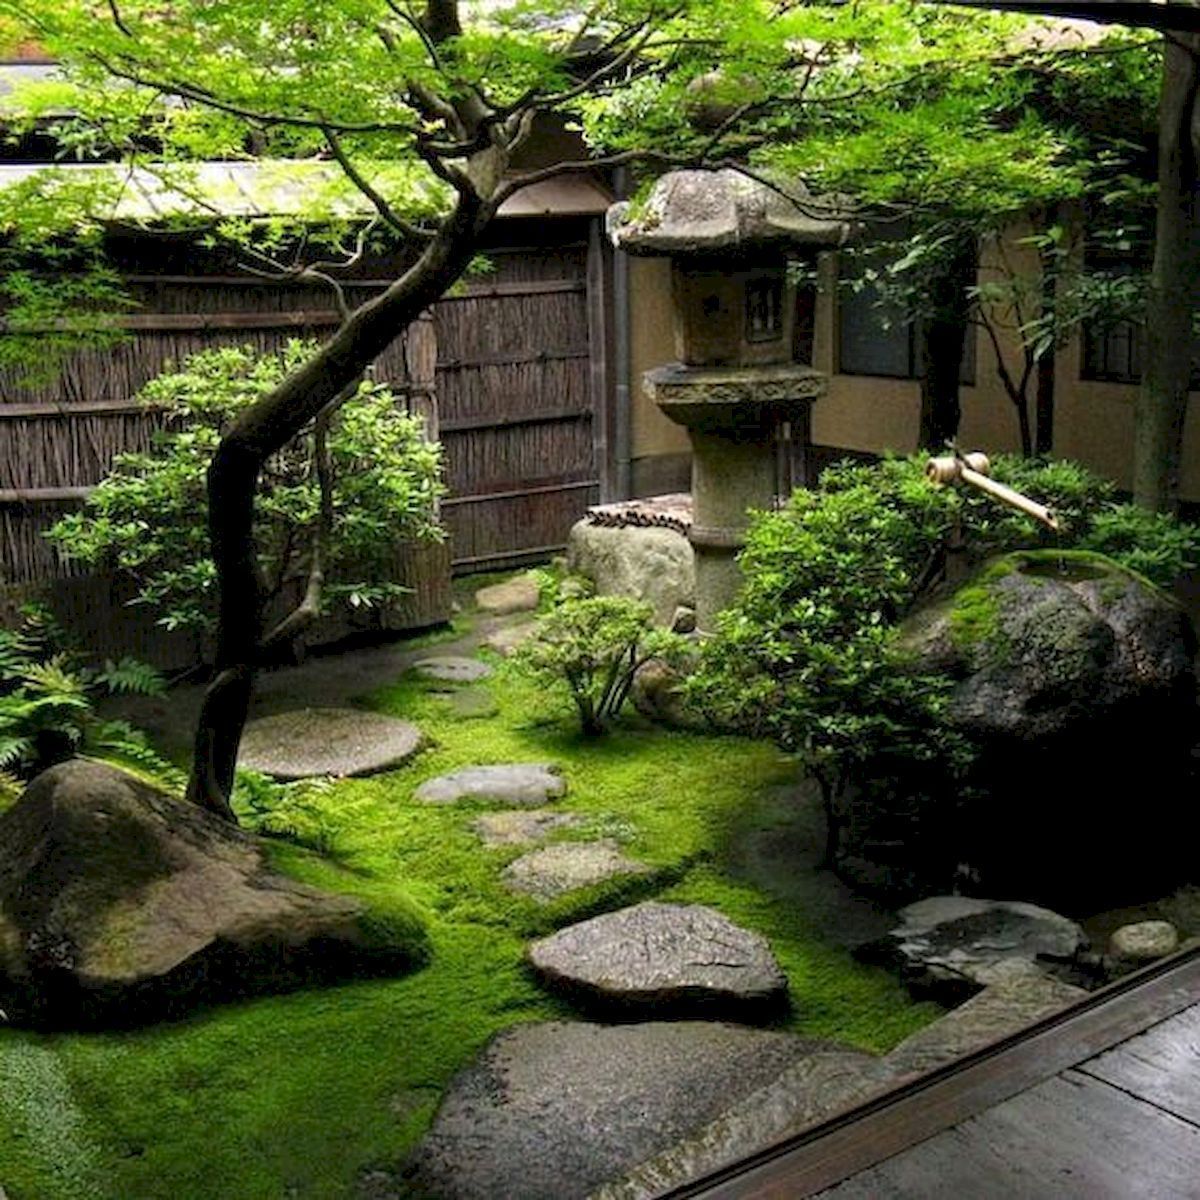 The Beauty and Serenity of Japanese Gardens